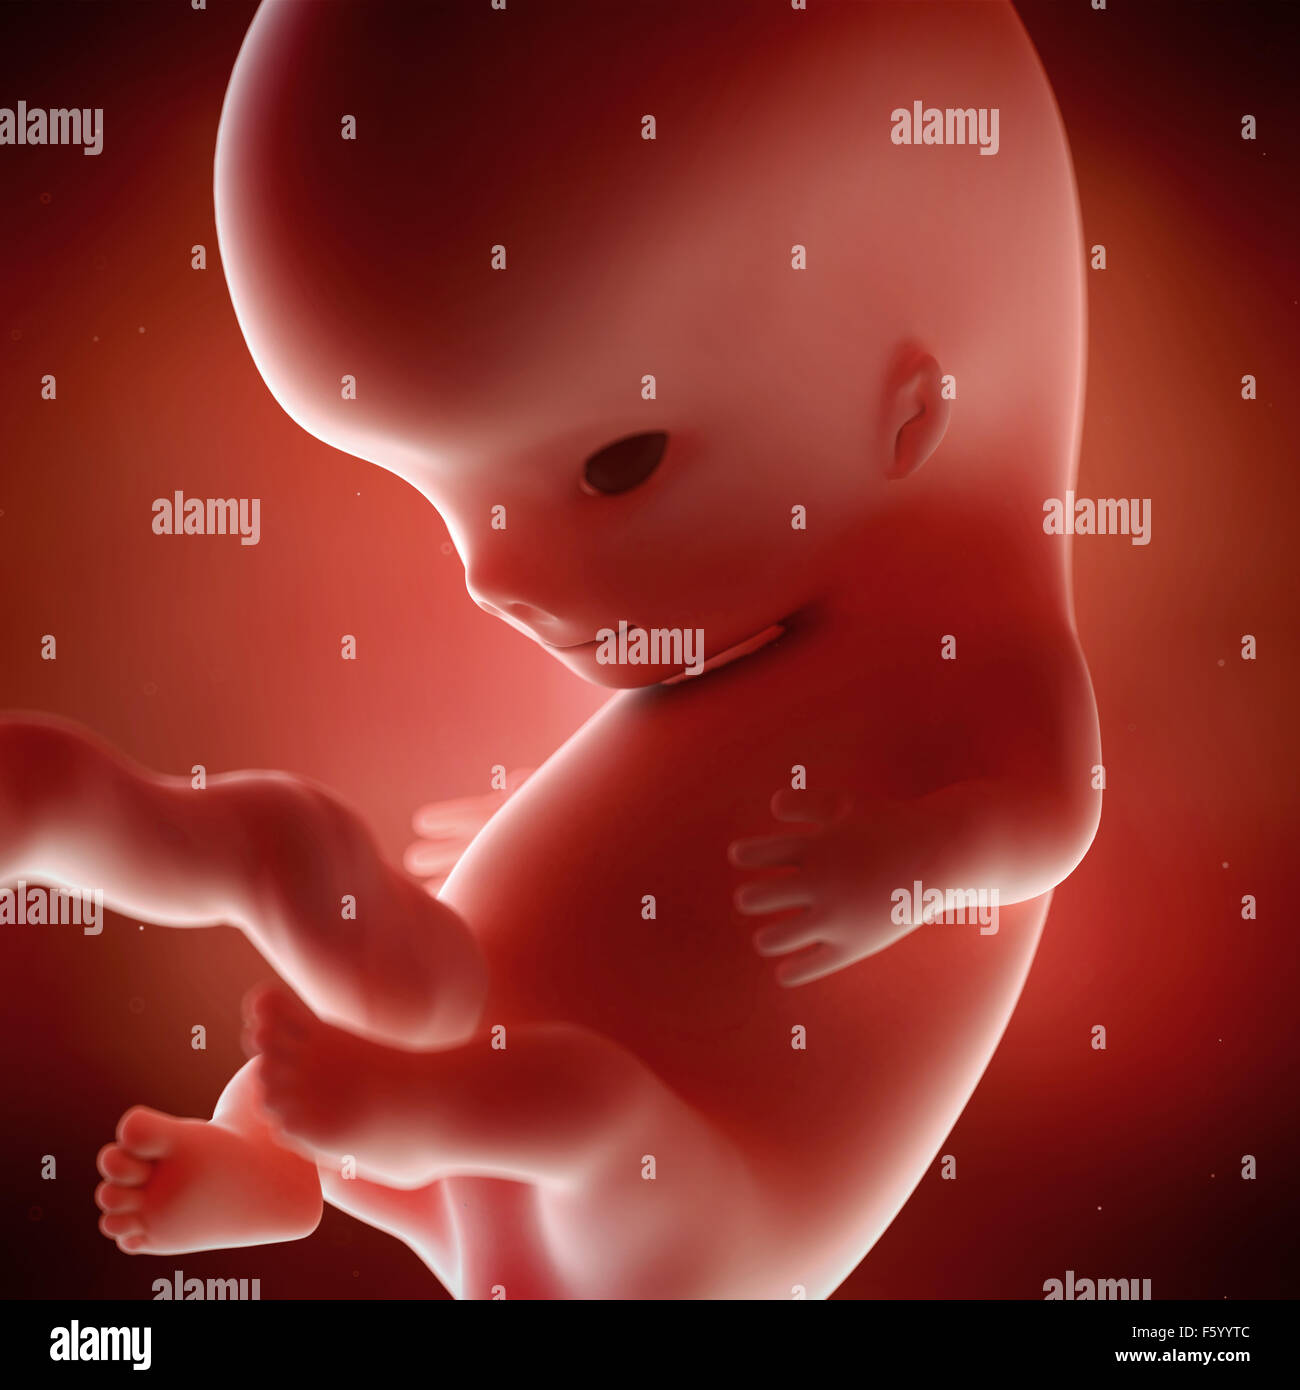 medical accurate 3d illustration of a fetus week 9 Stock Photo